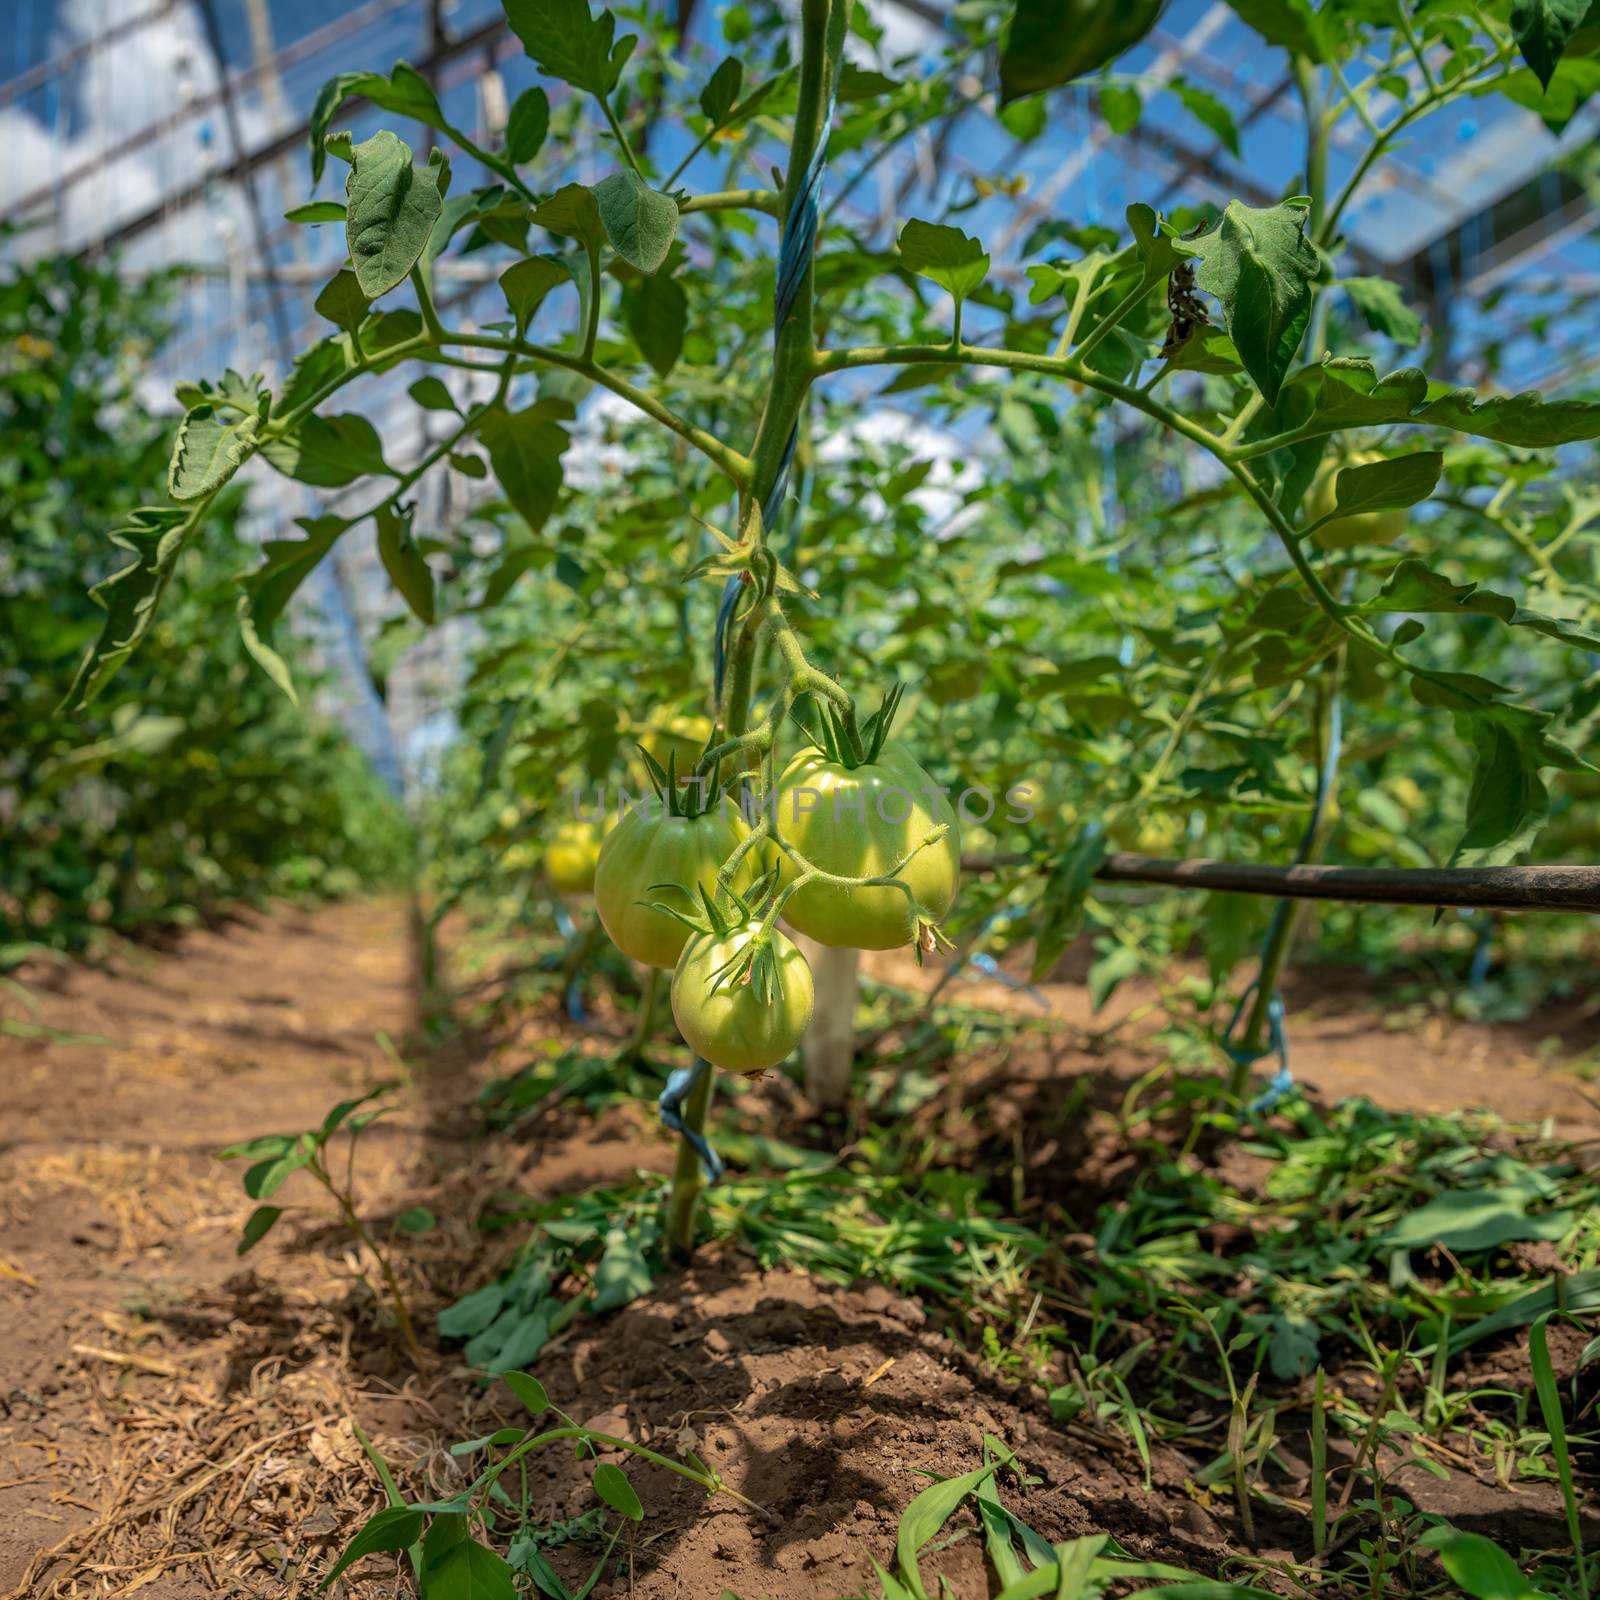 Organic green tomatoes ripen in a greenhouse. growing vegetables without chemicals, healthy food.